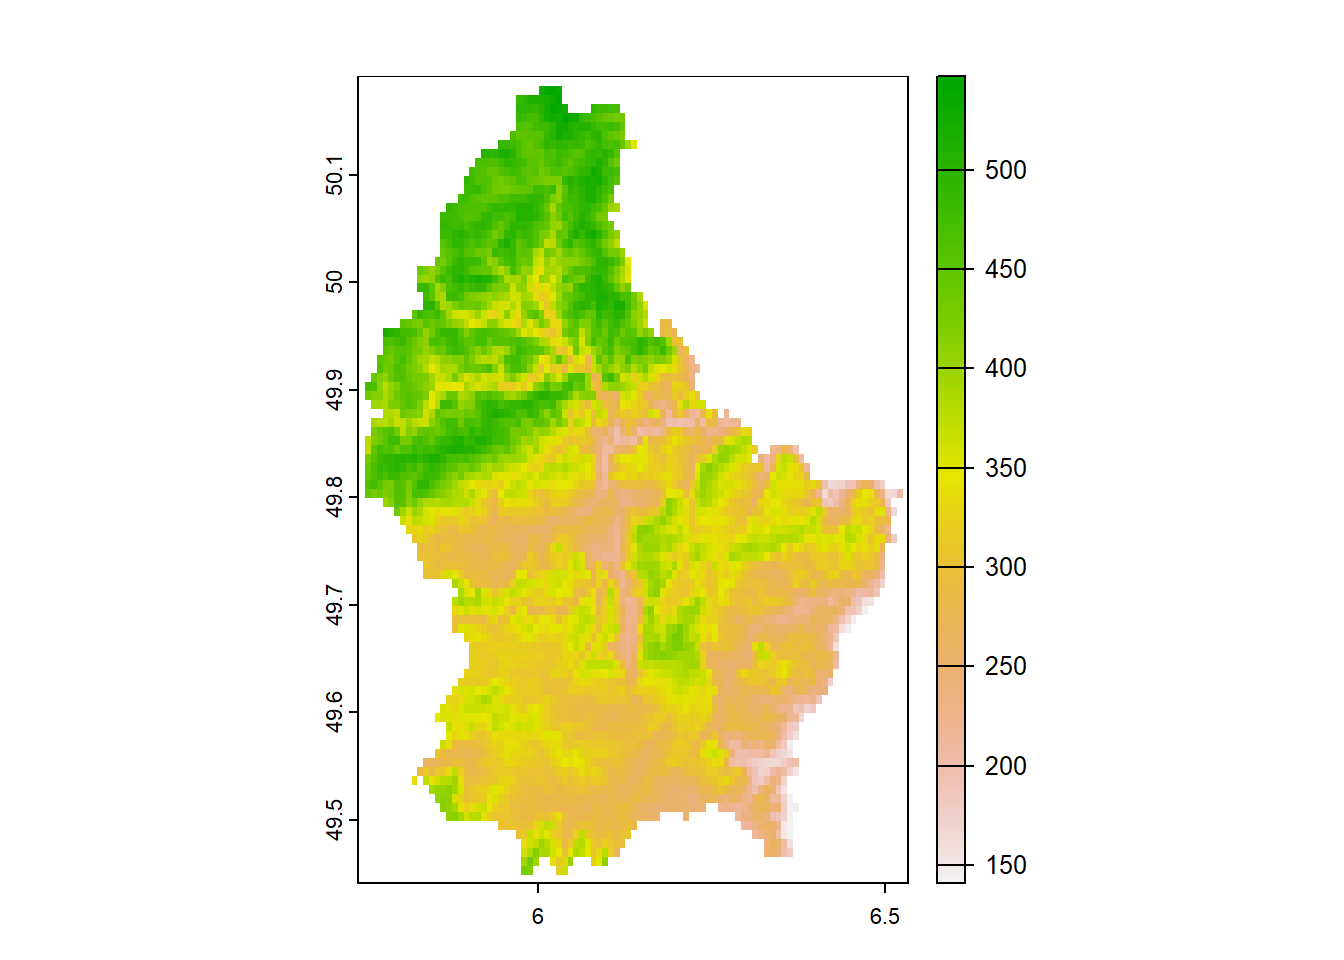 Elevation raster in Luxembourg obtained from **terra**.